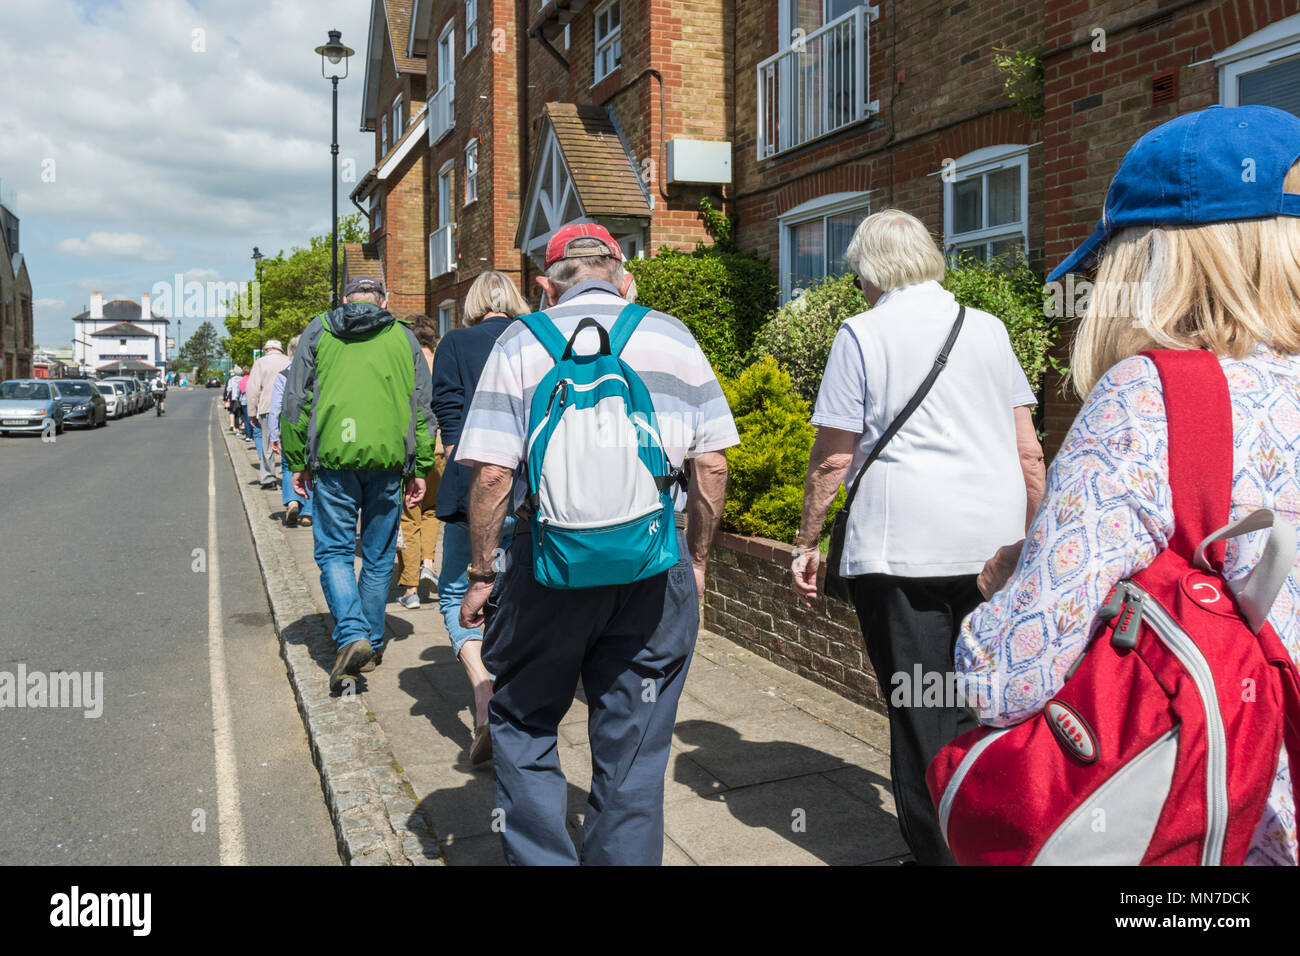 Group of elderly people with backpacks walking along a narrow pavement in the UK. Stock Photo